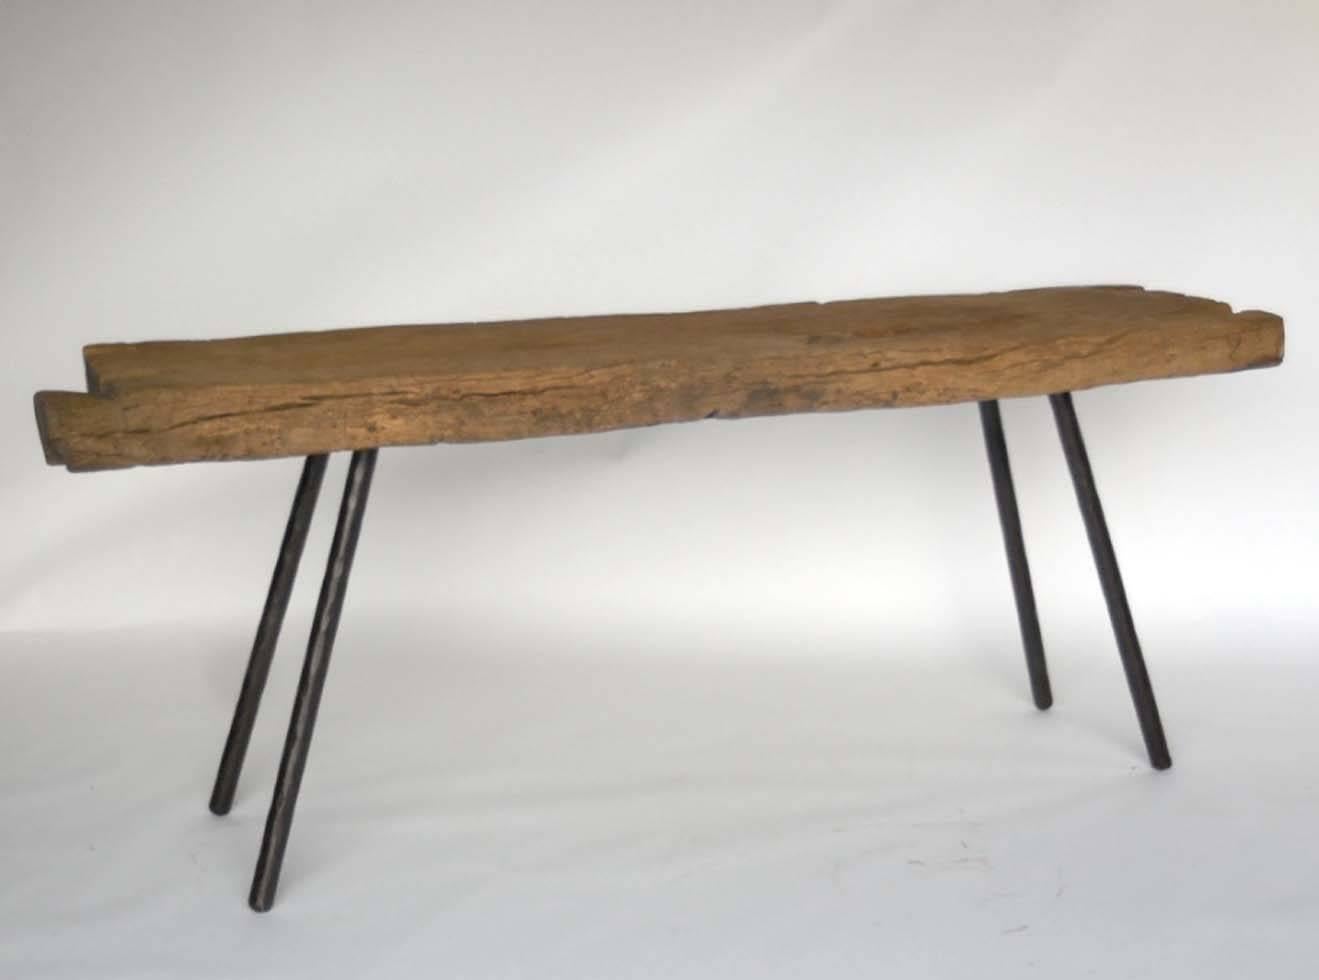 200 year old Japanese wooden trough atop contemporary hand-forged iron legs. Measures: Trough is about 3 1/2" -  4" thick, beautiful, old worn wood with naturally weathered patina. Smooth to the touch. One of a kind piece made by Dos